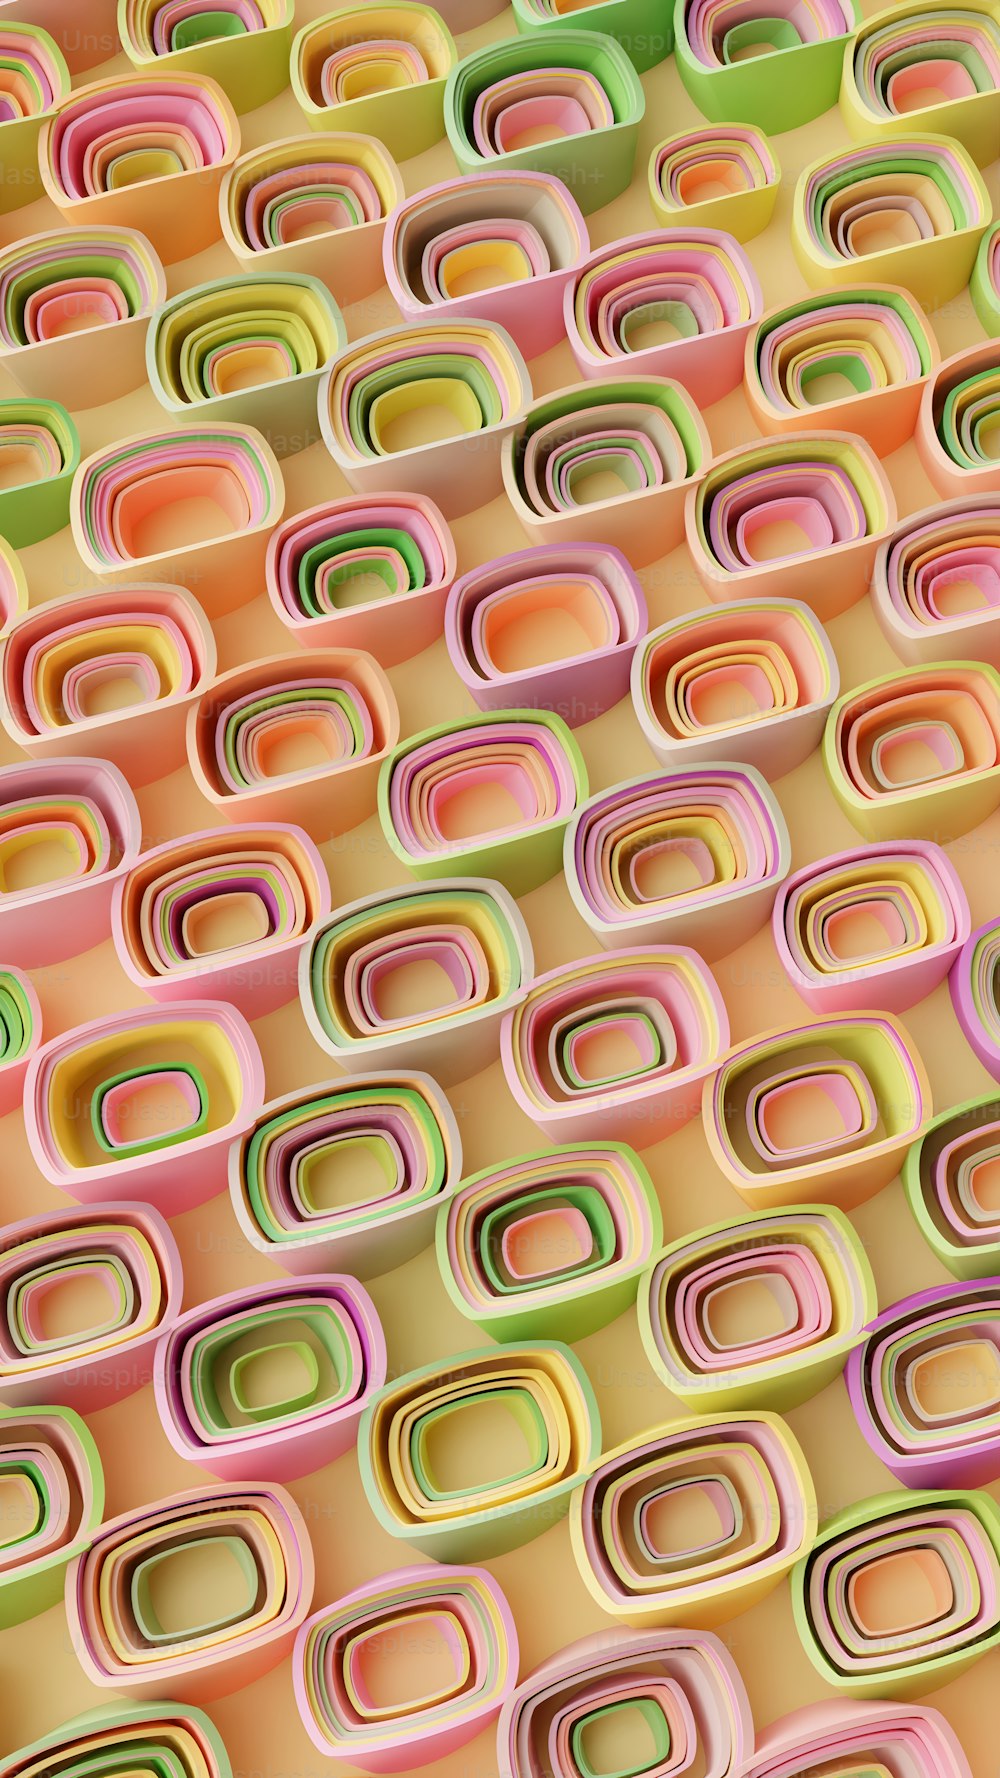 a multicolored abstract background with circles and rectangles